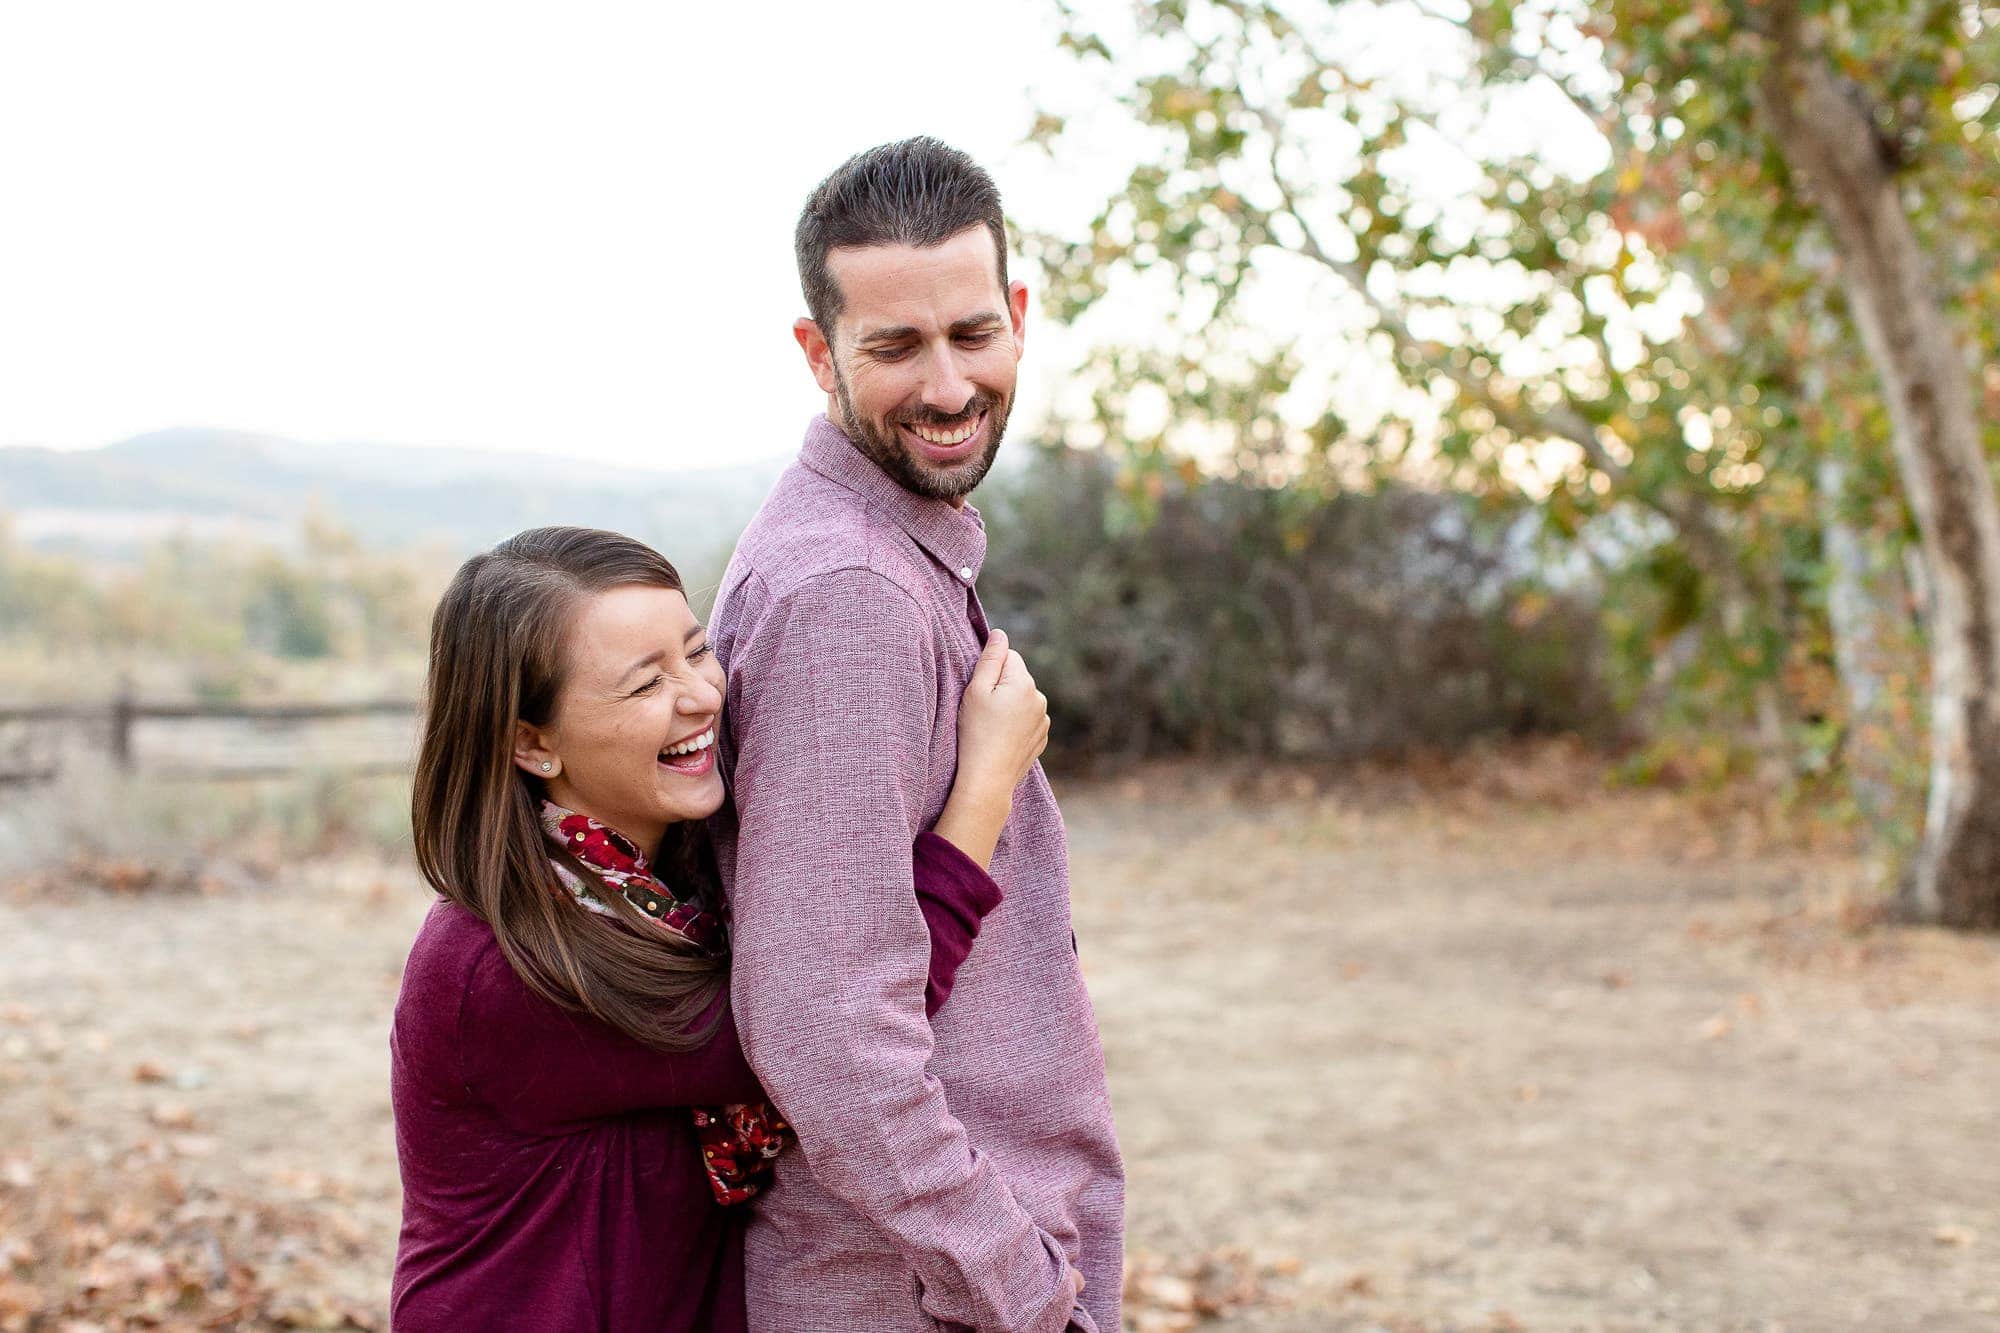 Couple embracing and laughing in front of desert landscape